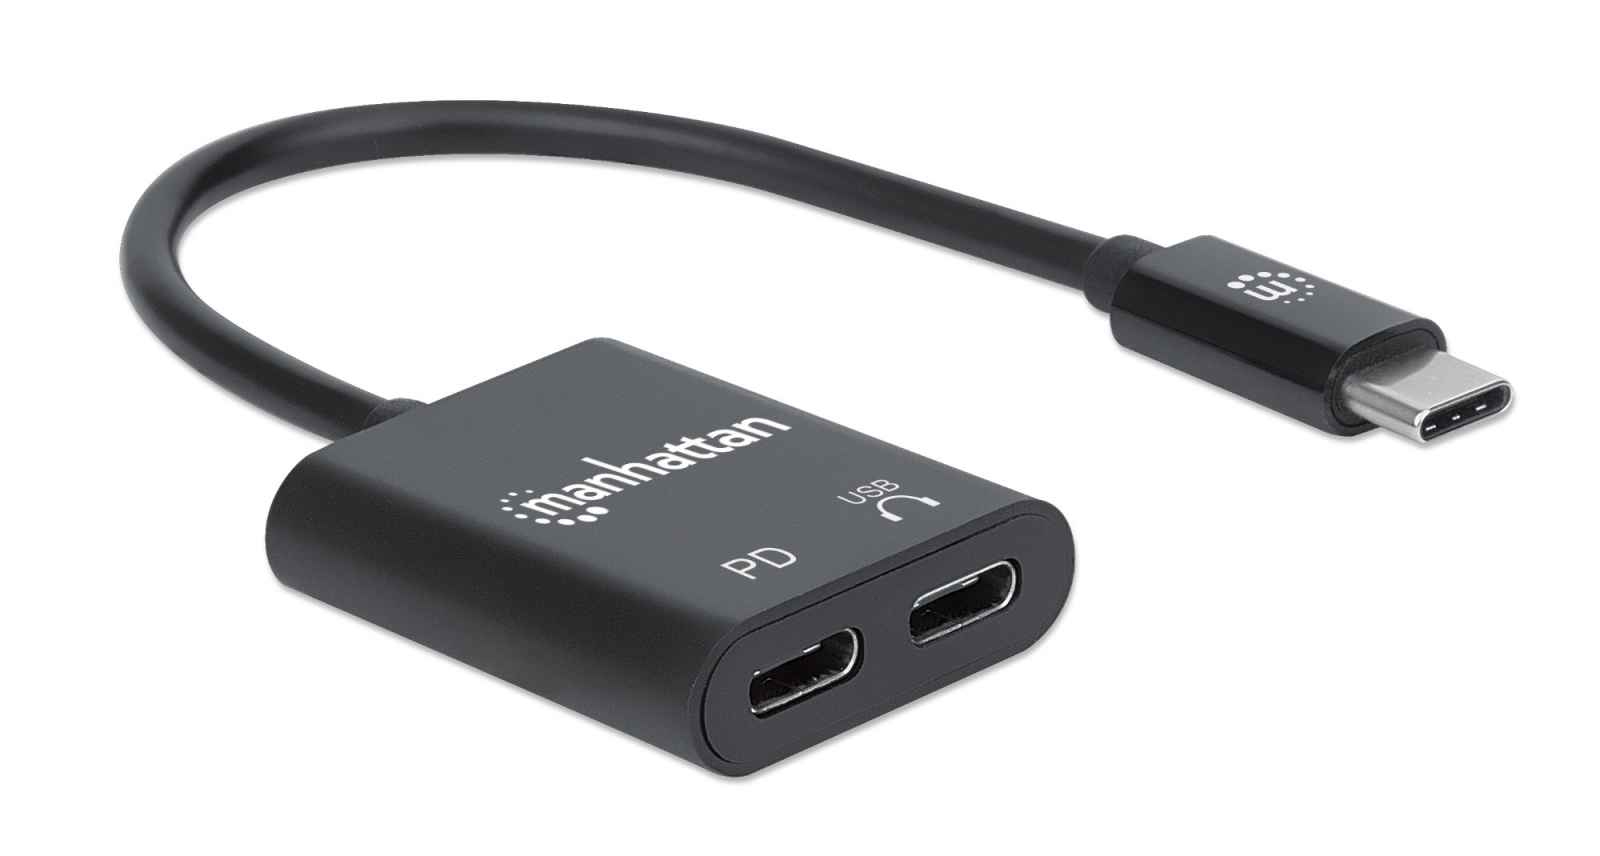 Manhattan USB-C to USB-C (inc Power Delivery) and USB-C Audio, 480 Mbps (USB 2.0), Cable 11cm, Black, Box